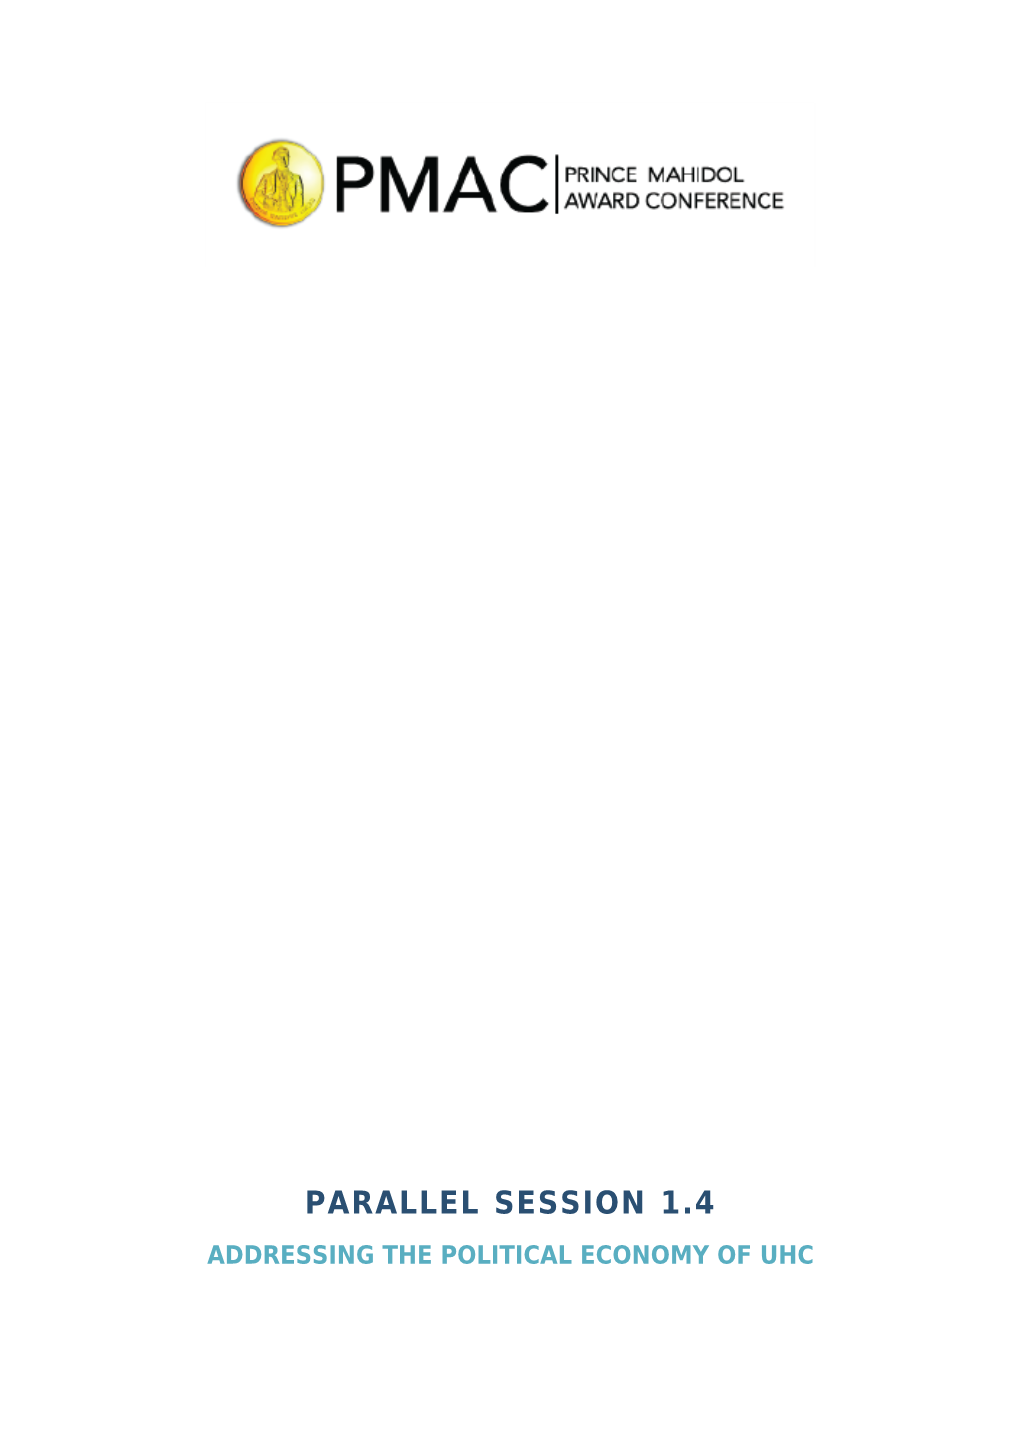 Parallel Session 1.4 Addressing the Political Economy of Uhc | Background